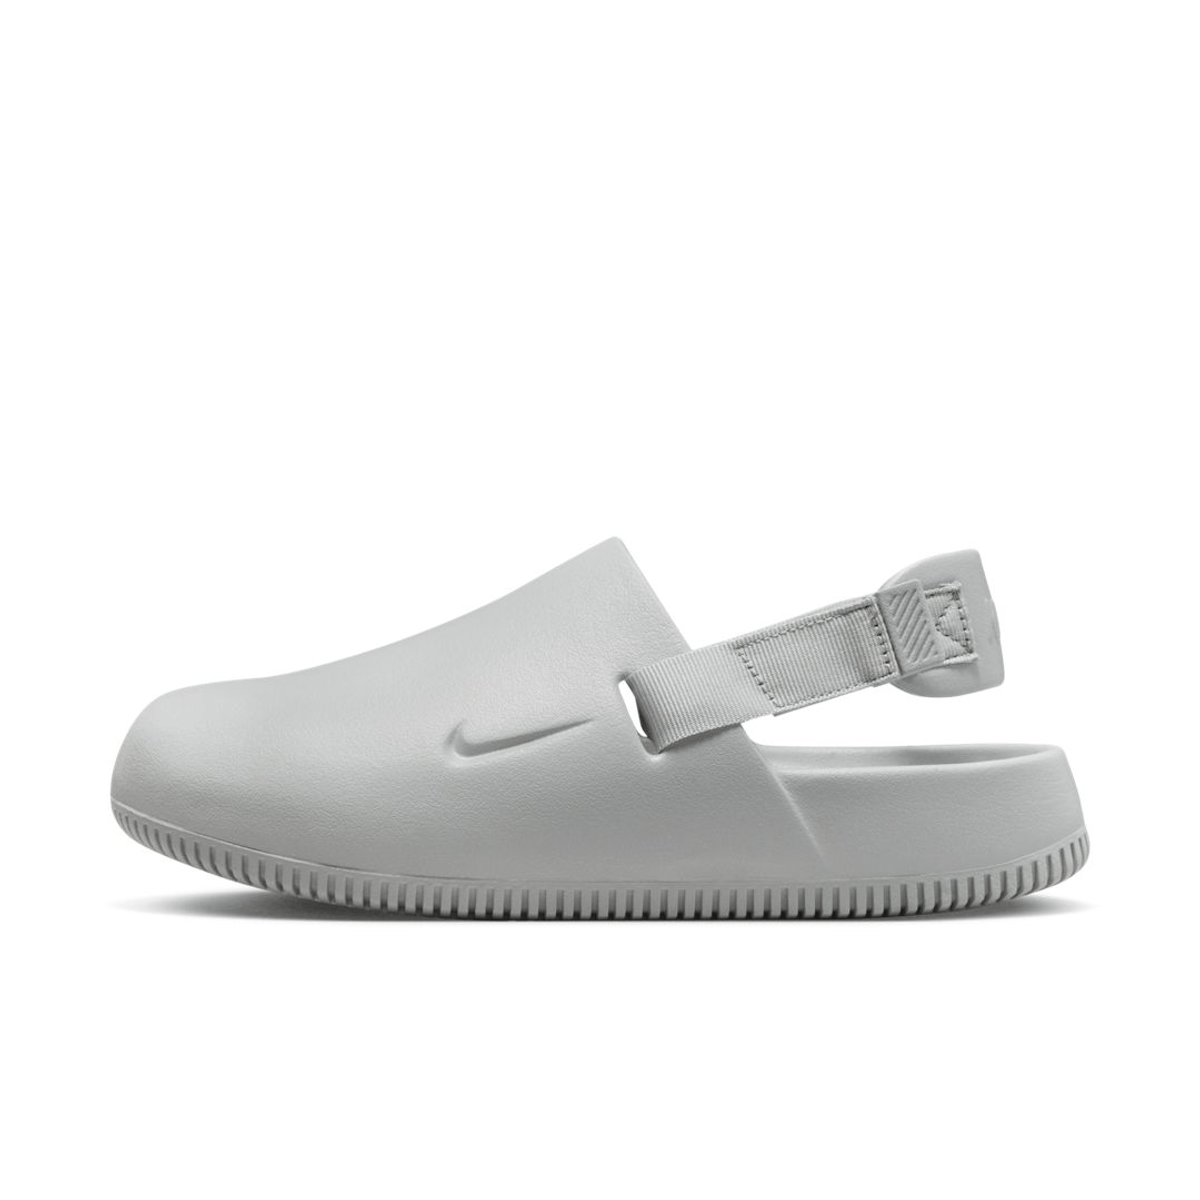 Official Images Of The Nike Calm Mule "Grey"